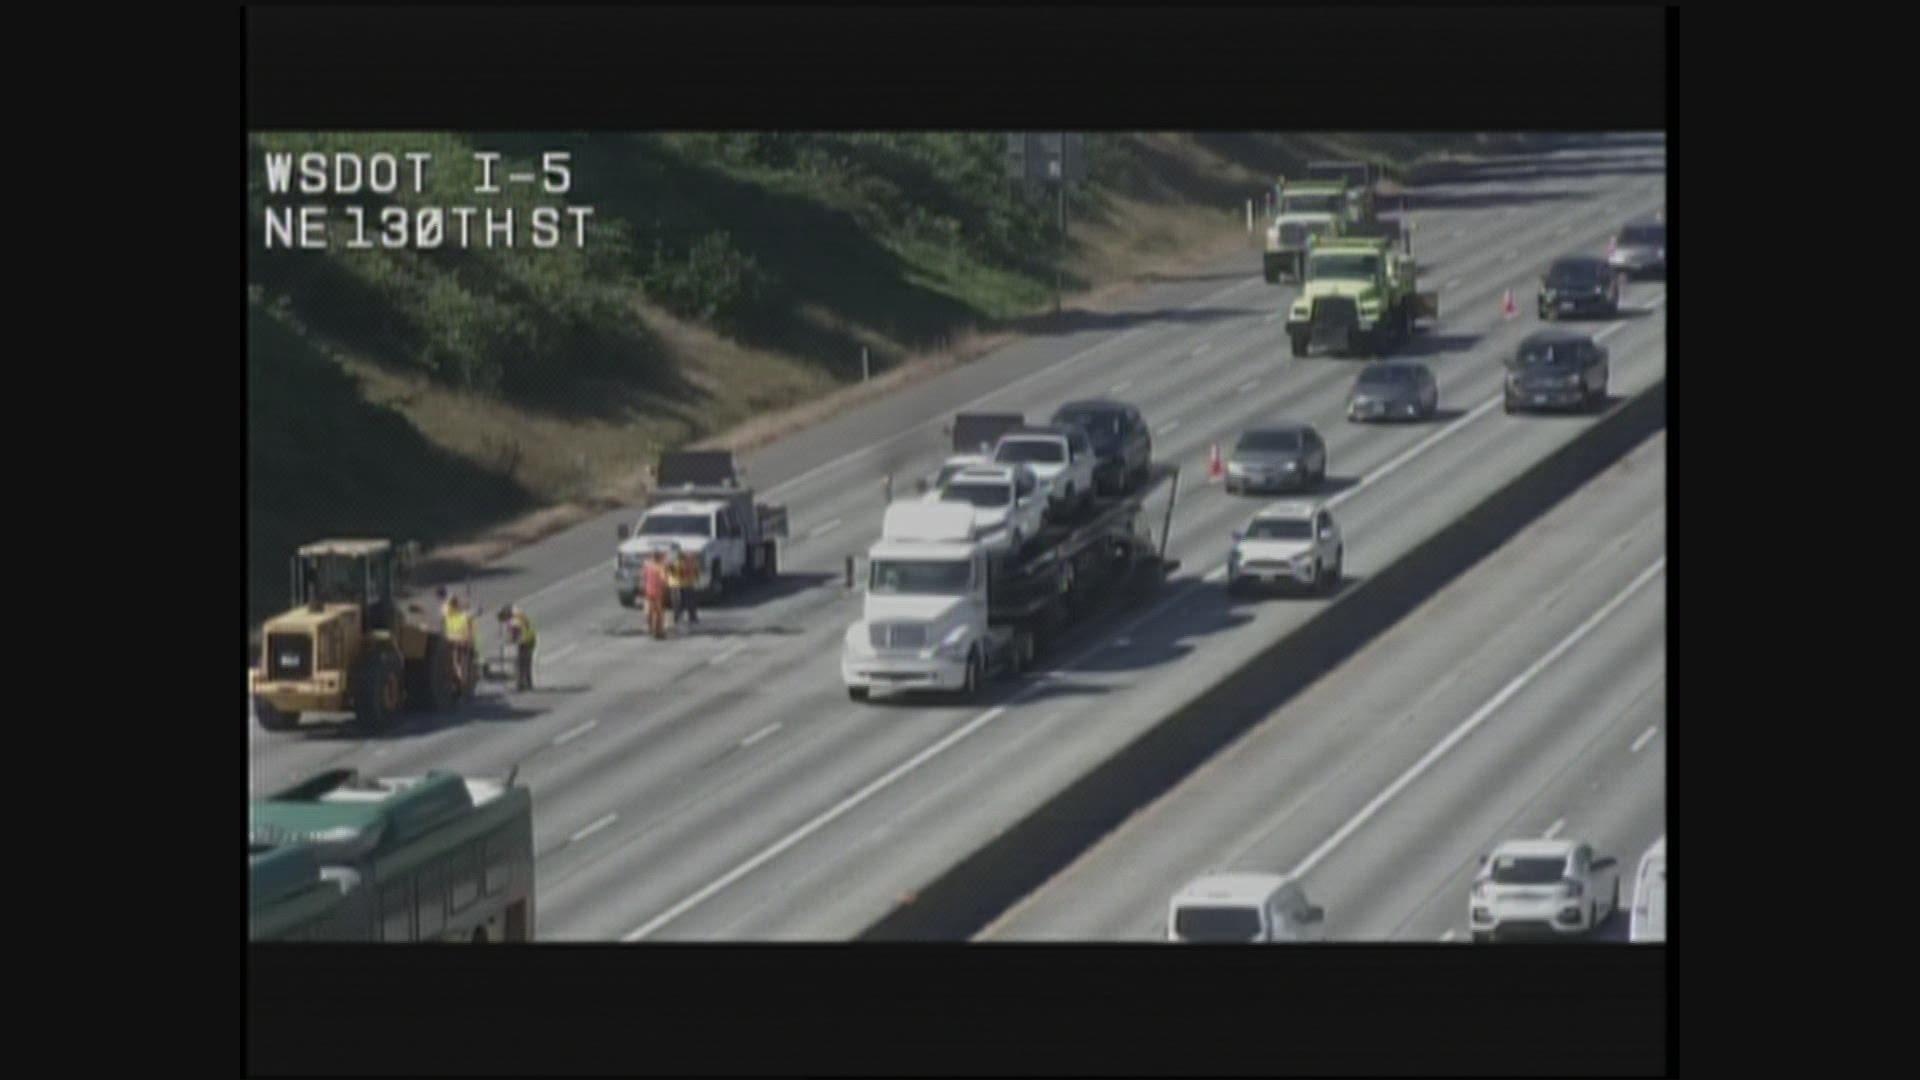 Drivers should expect backups after pavement buckled on southbound I-5 near 130th Street.